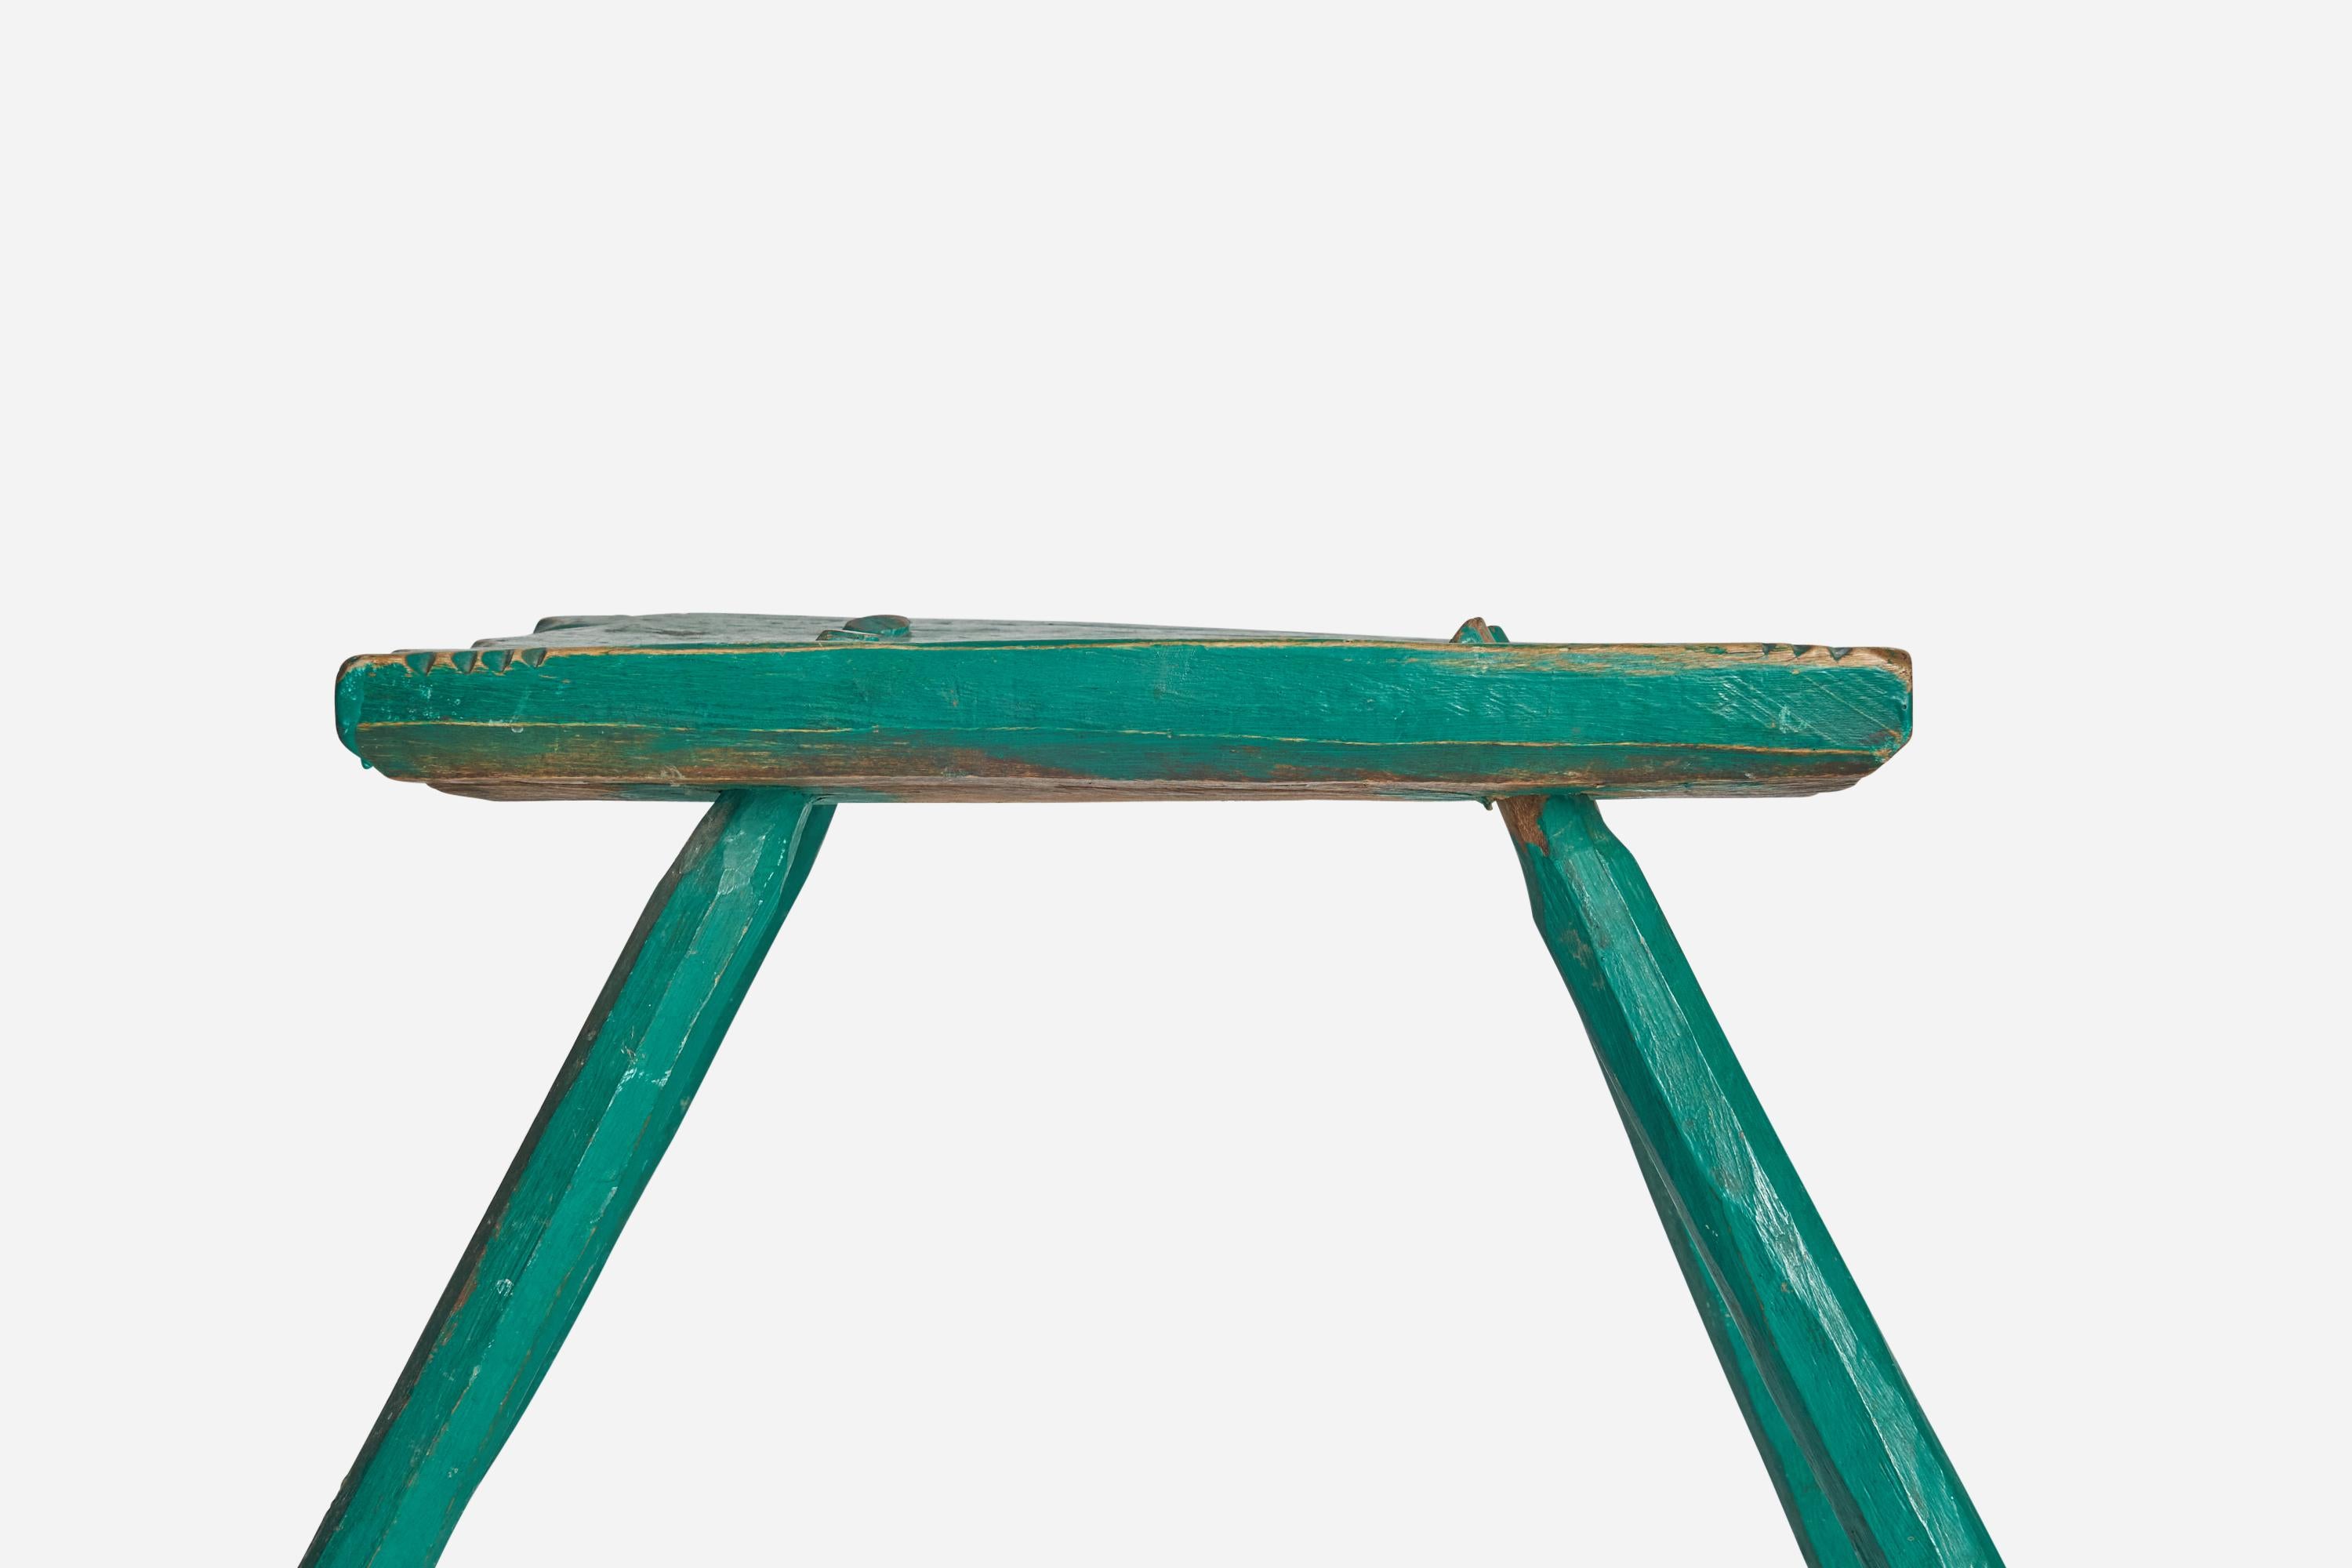 Swedish Folk Art, Farmers Stool, Green-Painted Wood, Sweden, Early 19th Century  For Sale 1